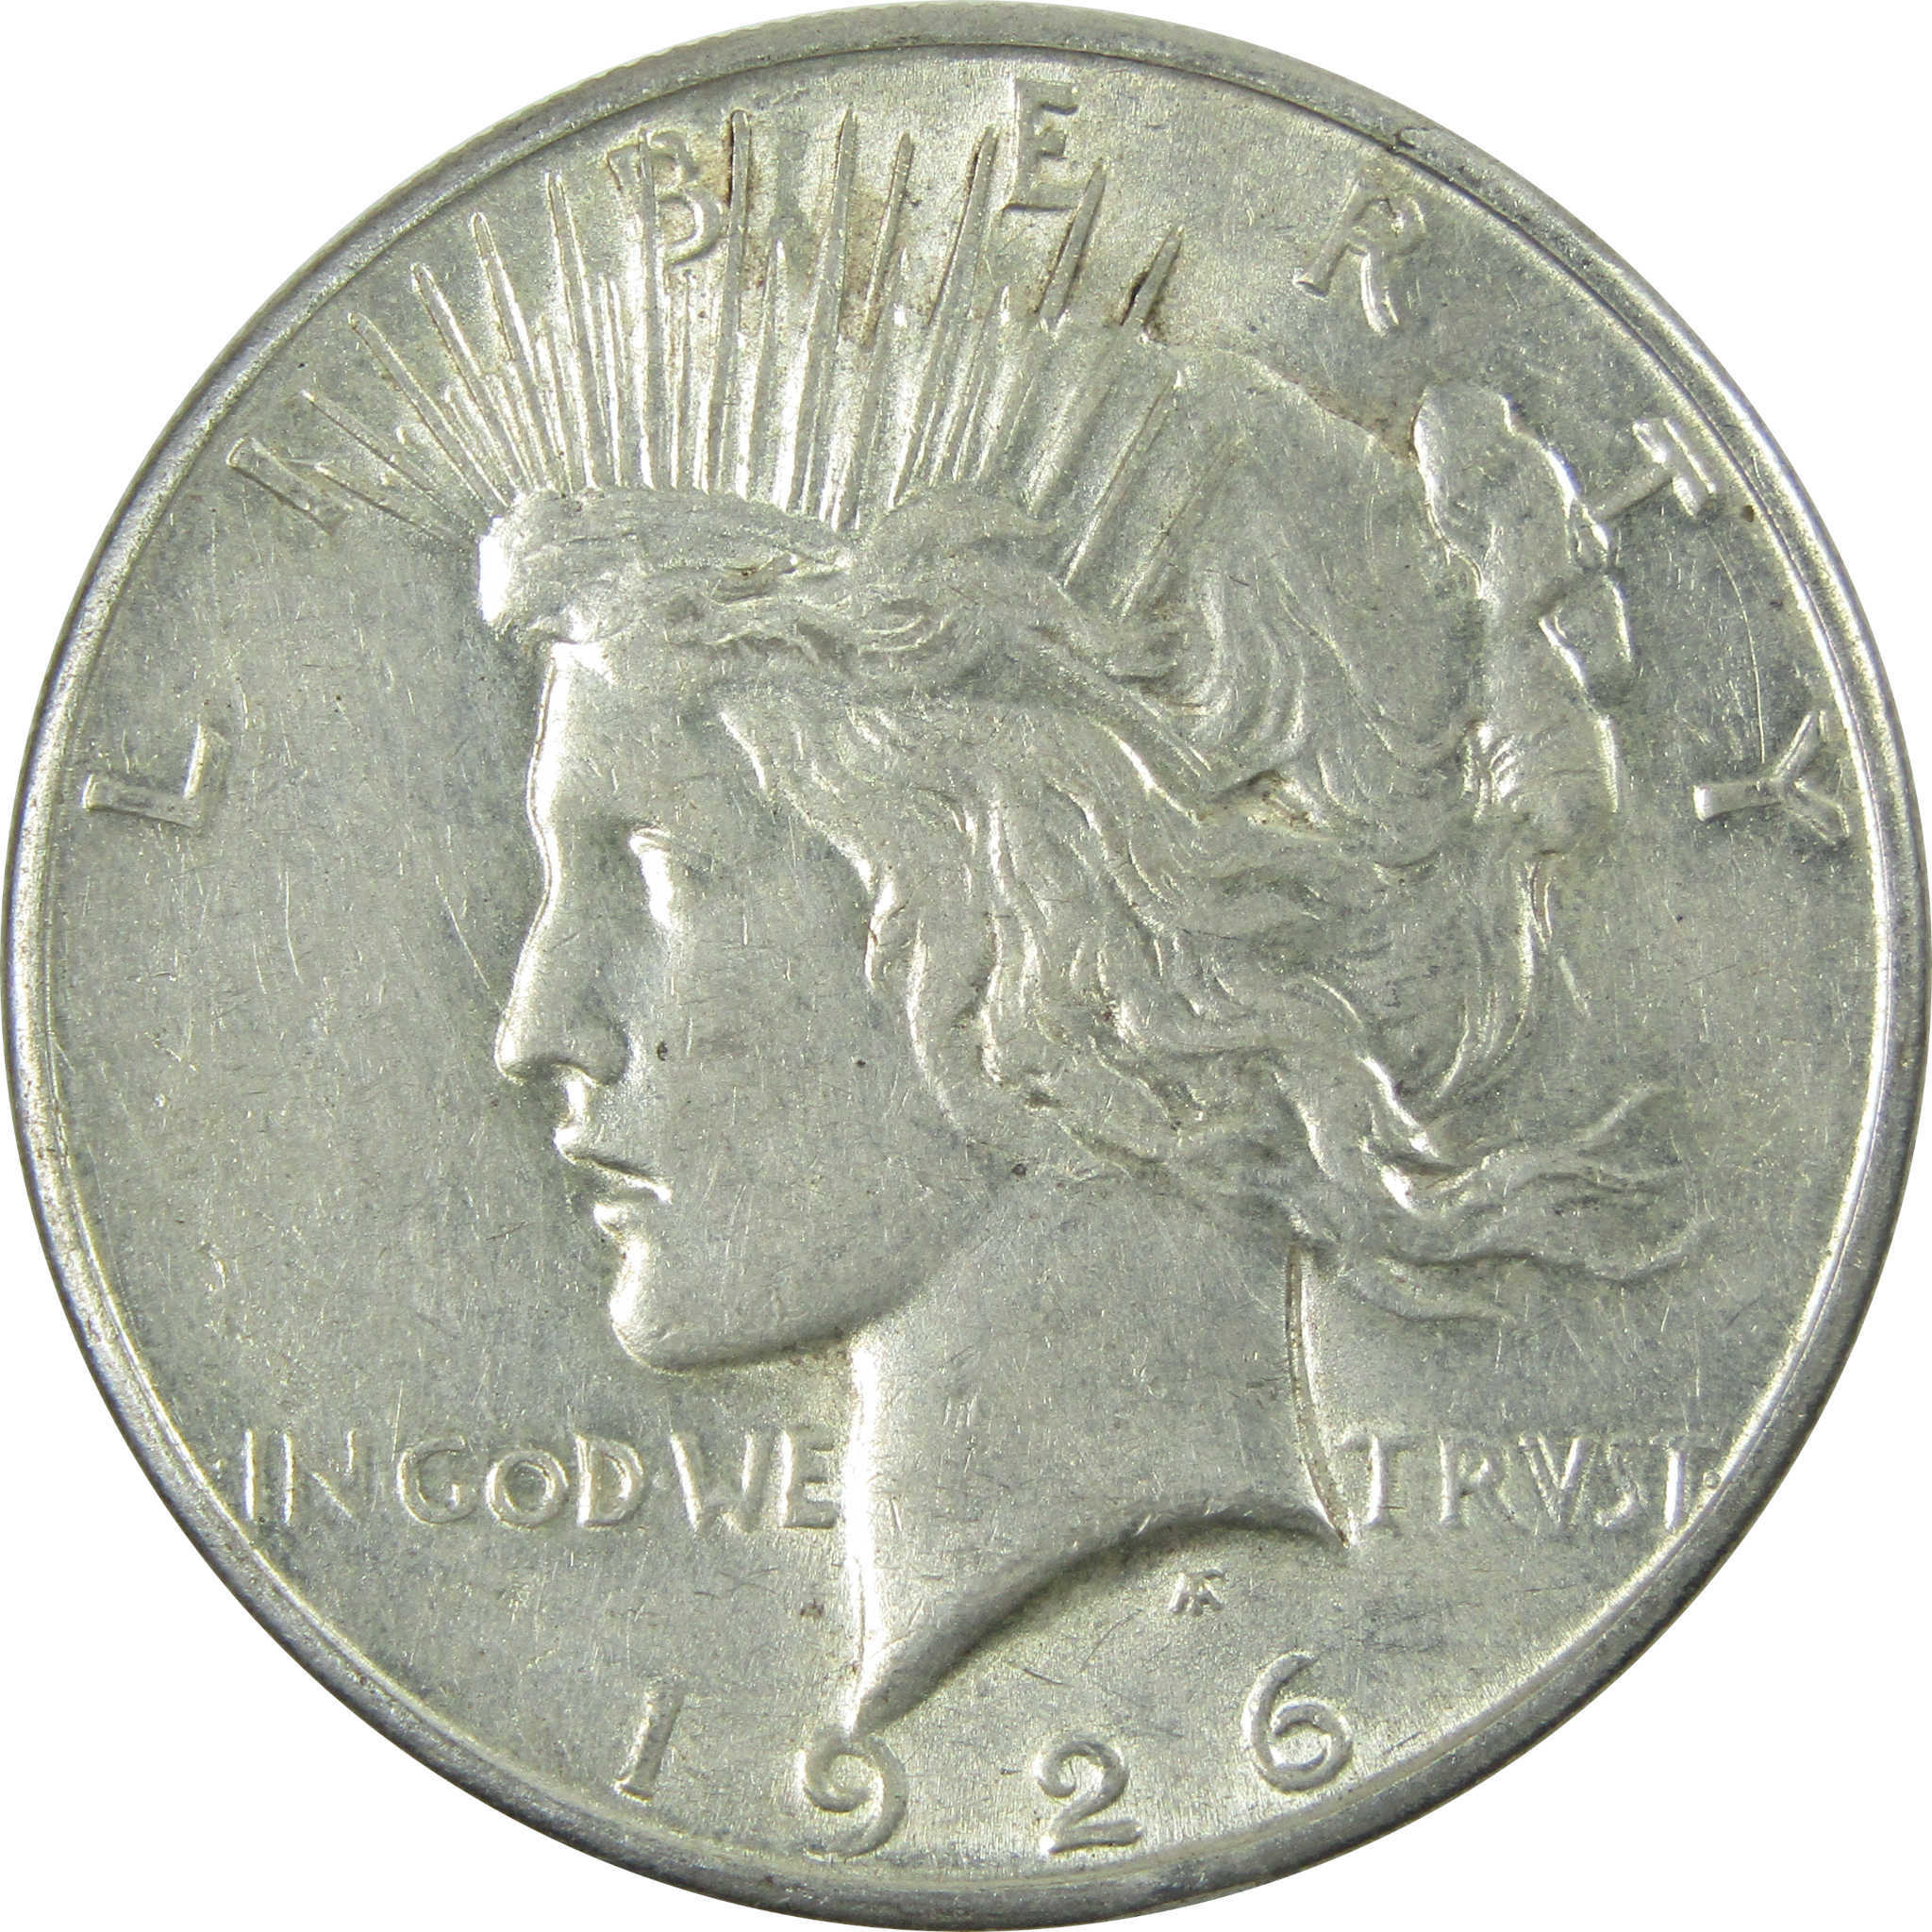 1926 S Peace Dollar XF EF Extremely Fine Silver $1 Coin SKU:I13695